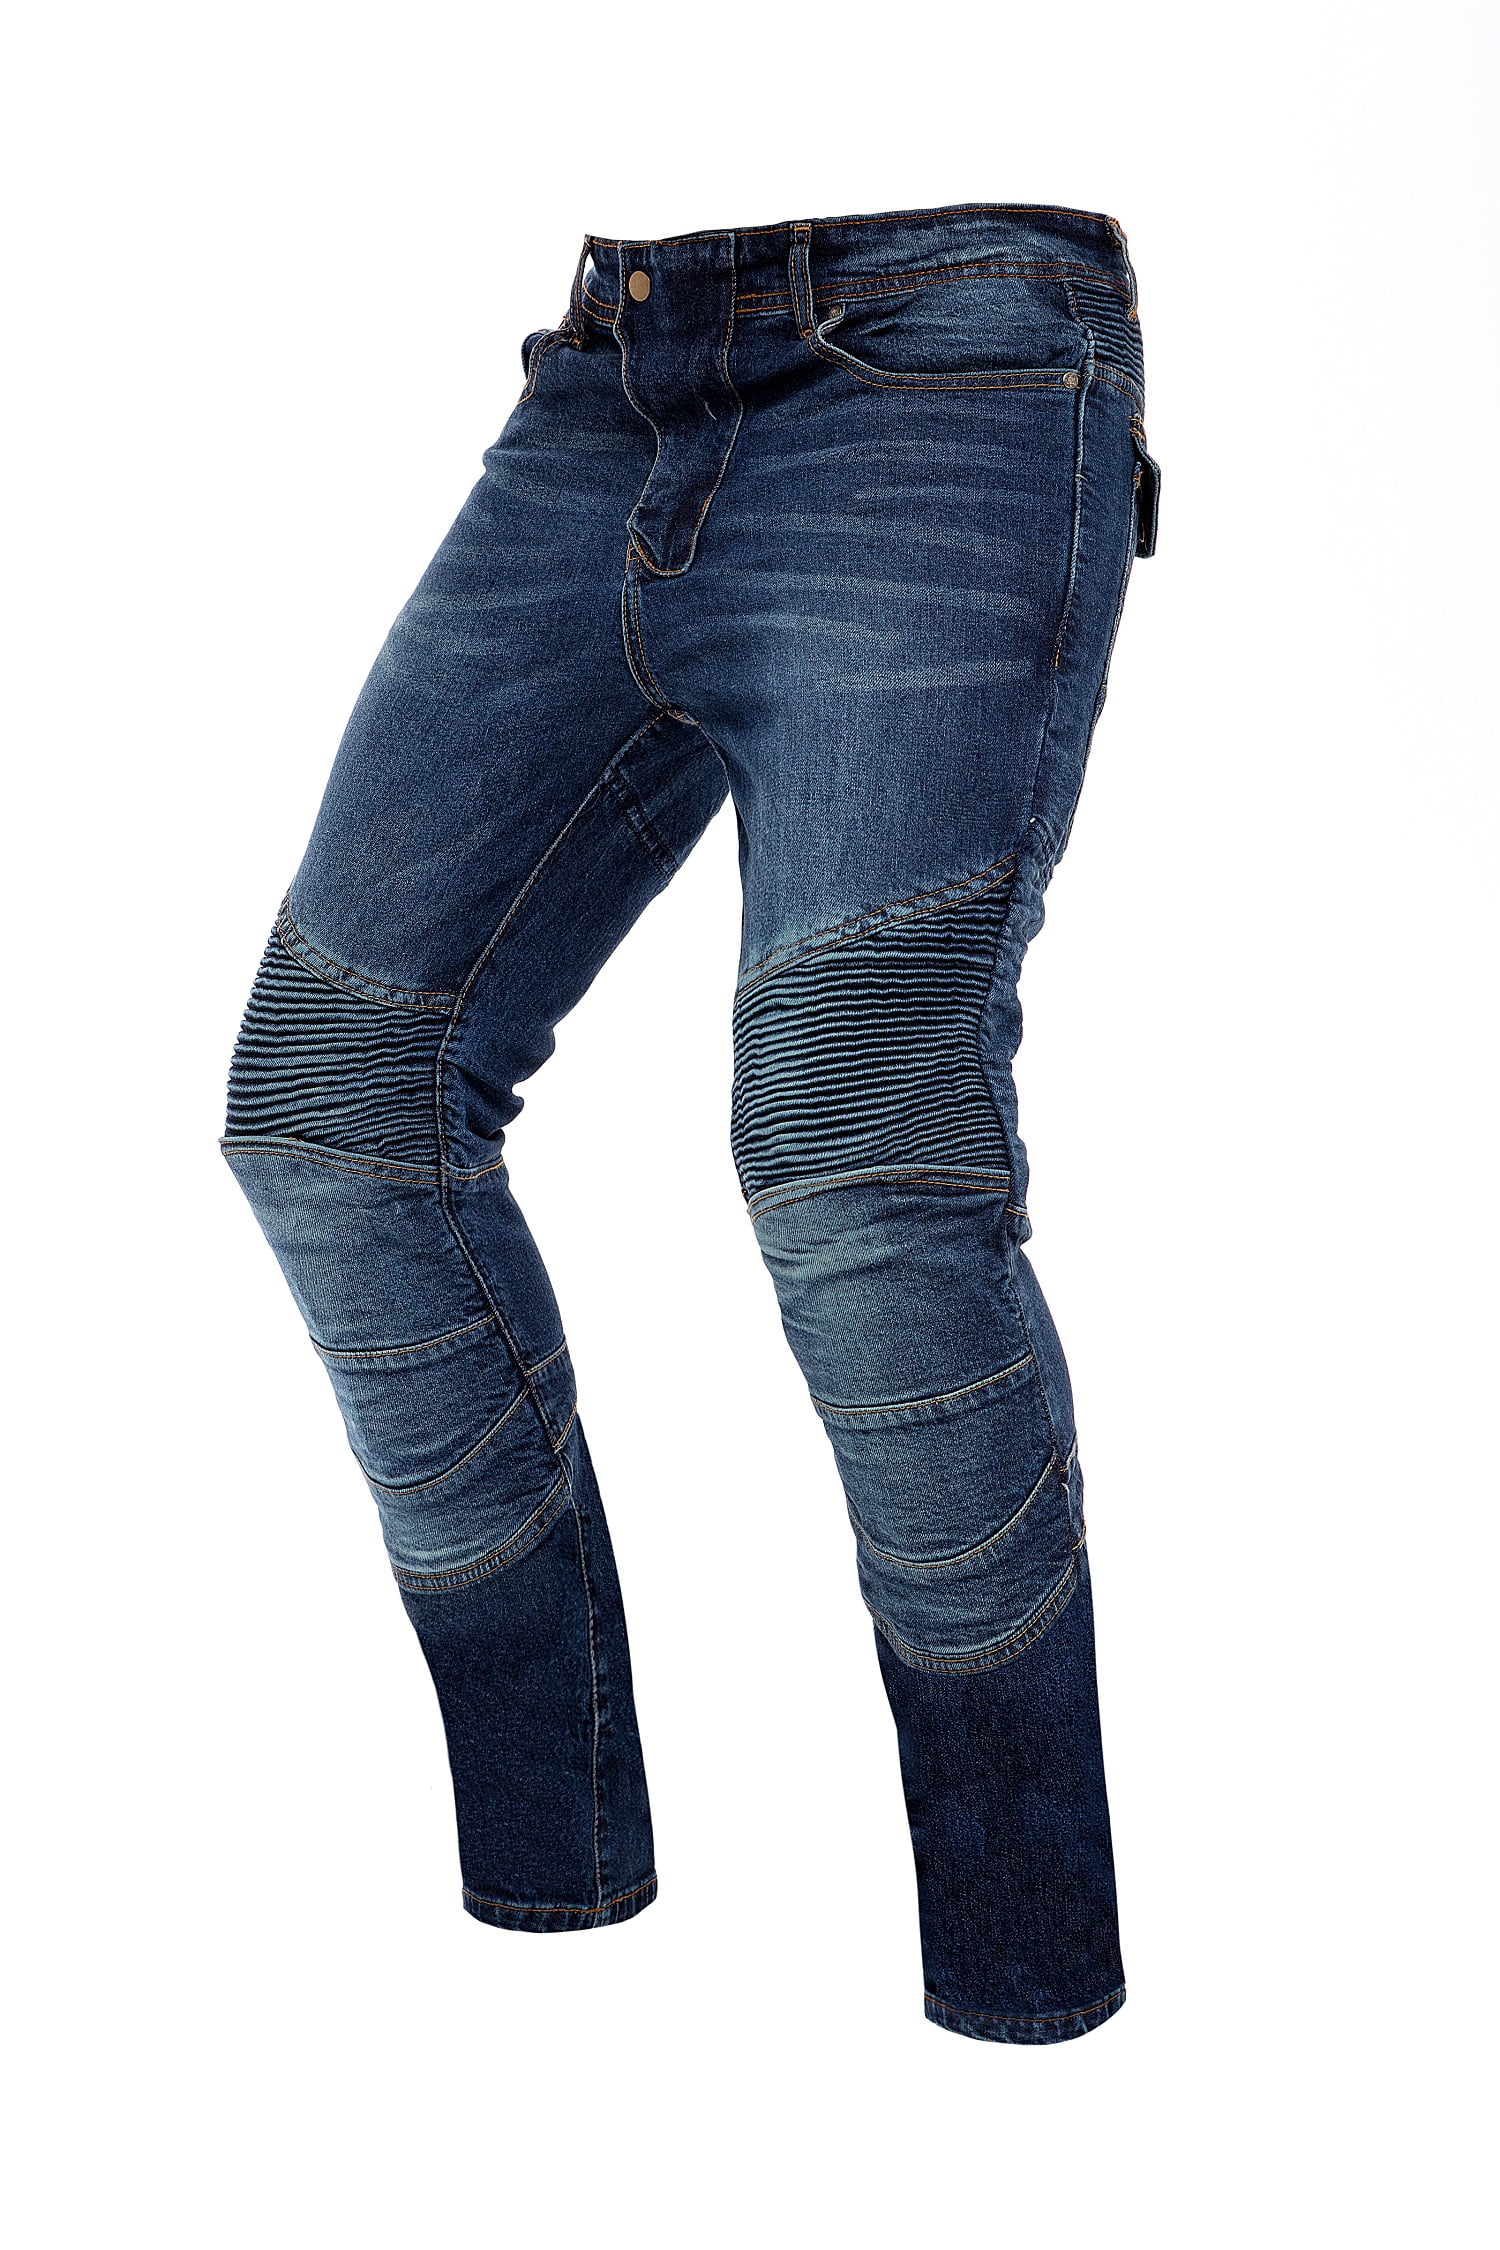 Women's Classic High Waist Stretch Jeans Protective Knee Pads Motorcycle Denim Trousers,Blue,XXL